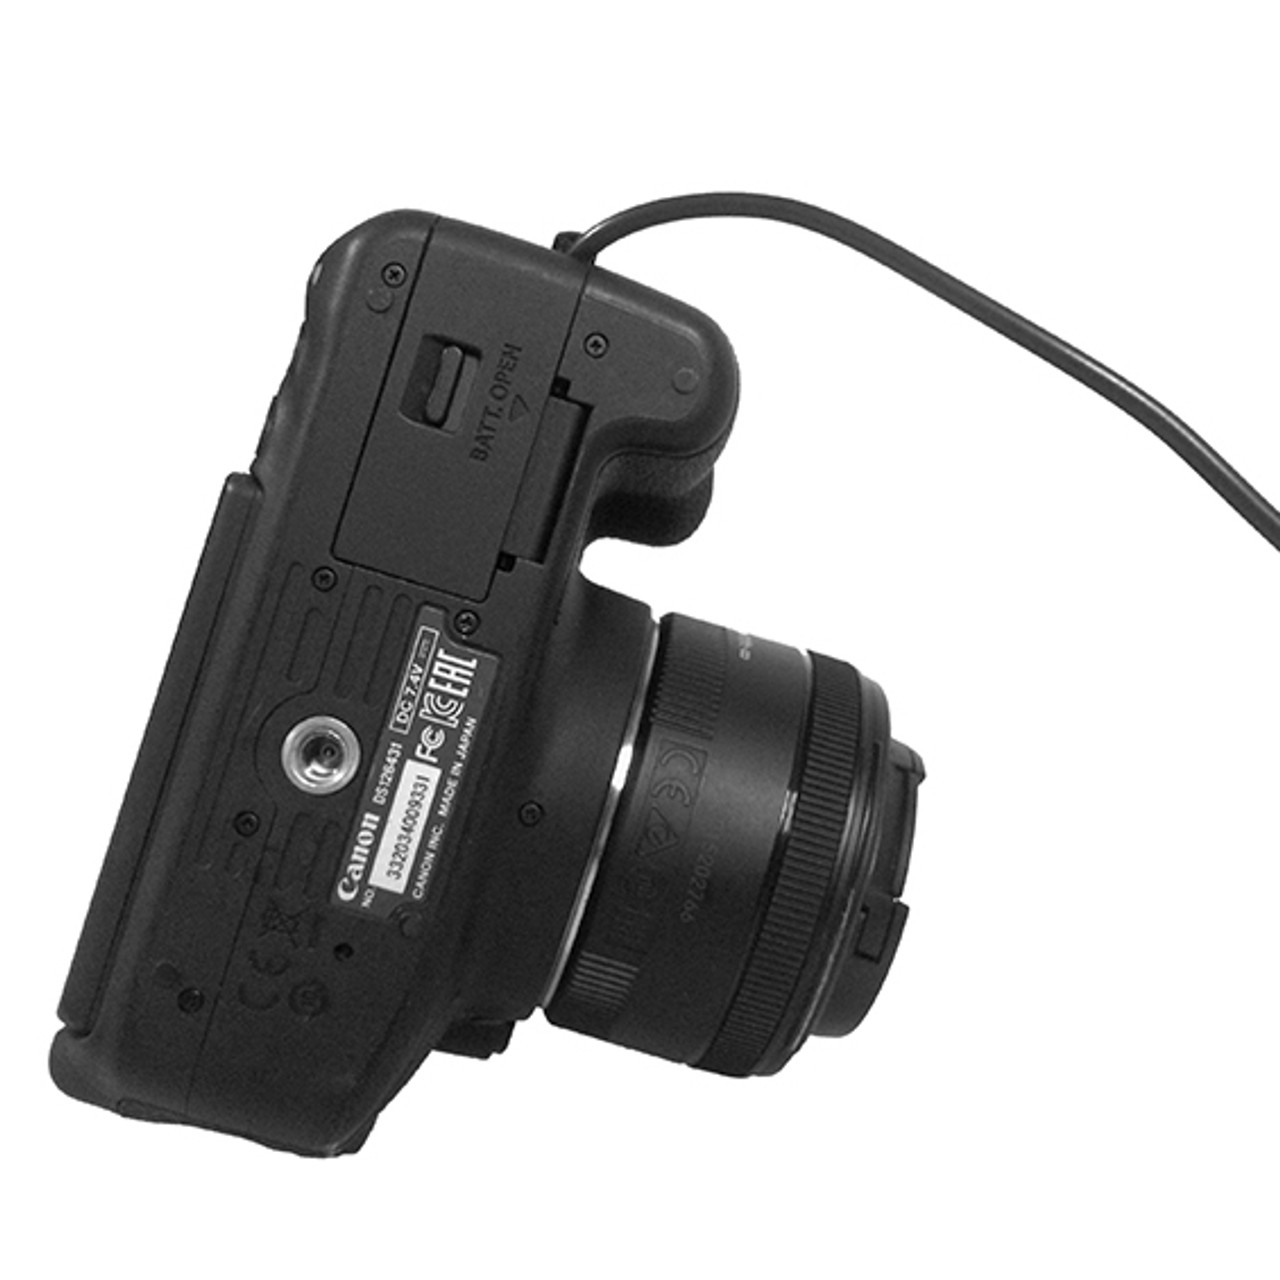 TETHER TOOLS RELAY CAMERA COUPLER - CRCE10 (CANON LP-E10)